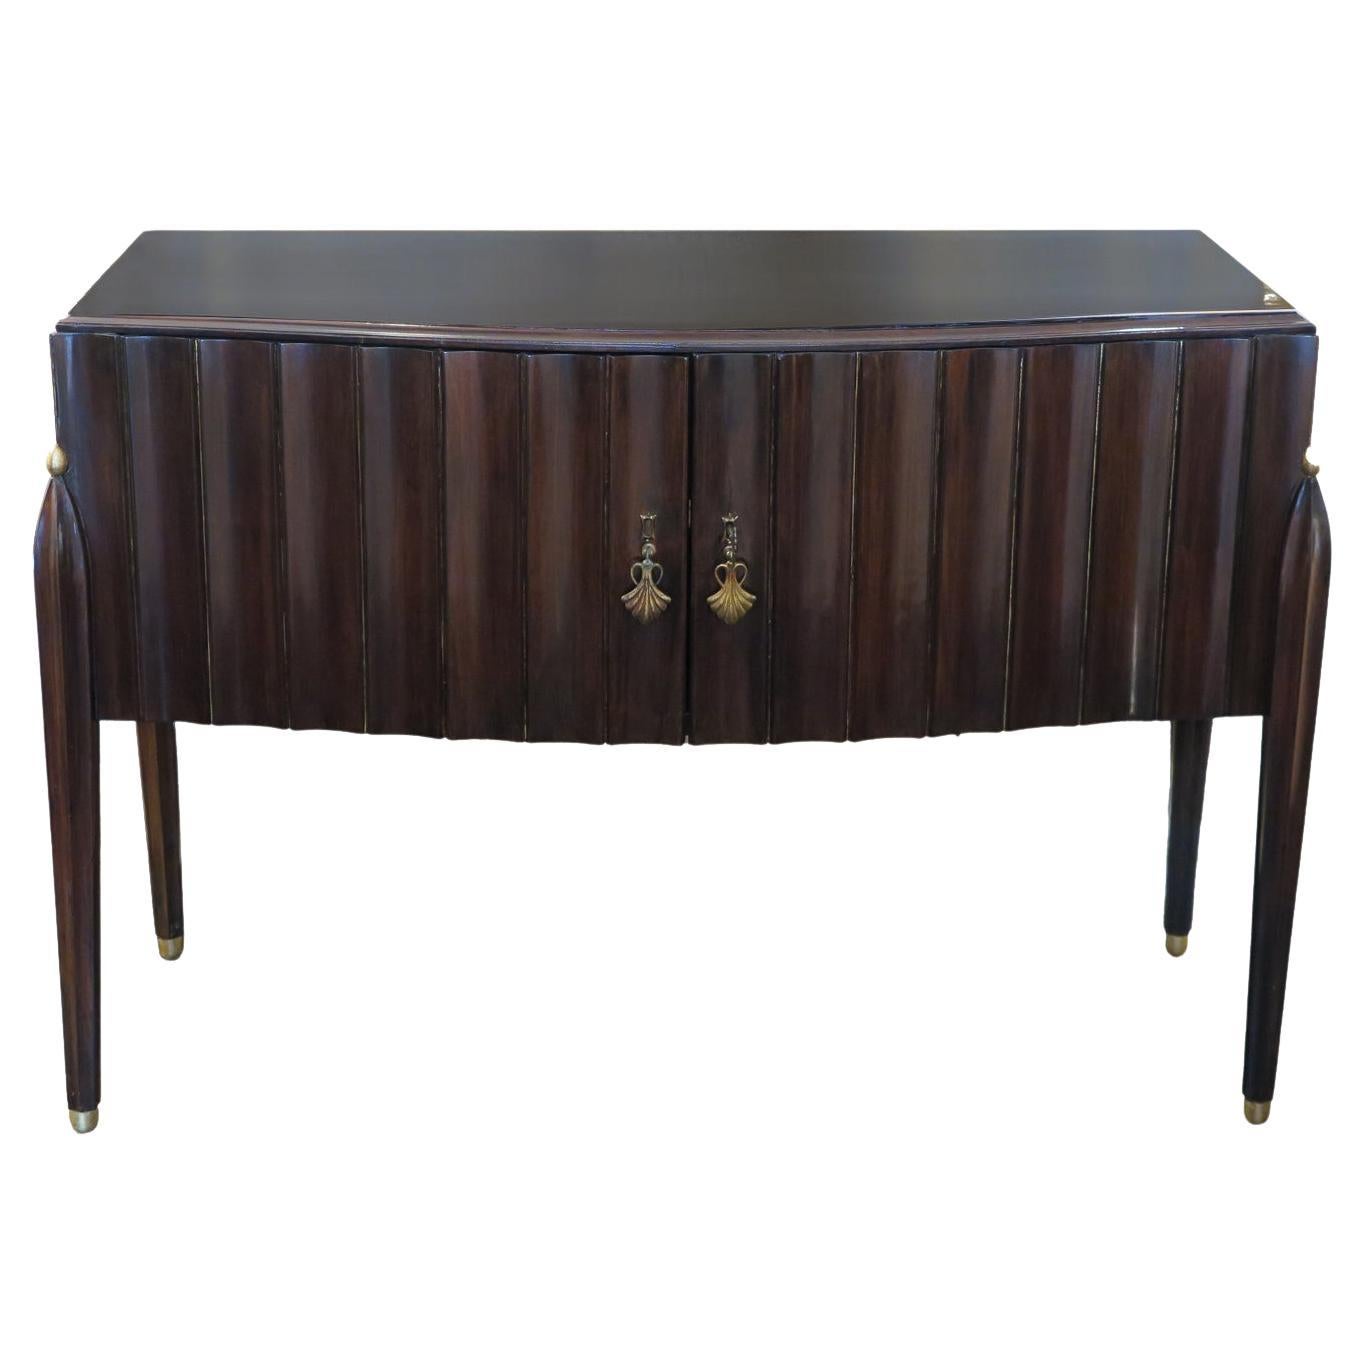 Fluted Console Cabinet in Dark Stained Mahogany, Italy, circa 1940s For Sale